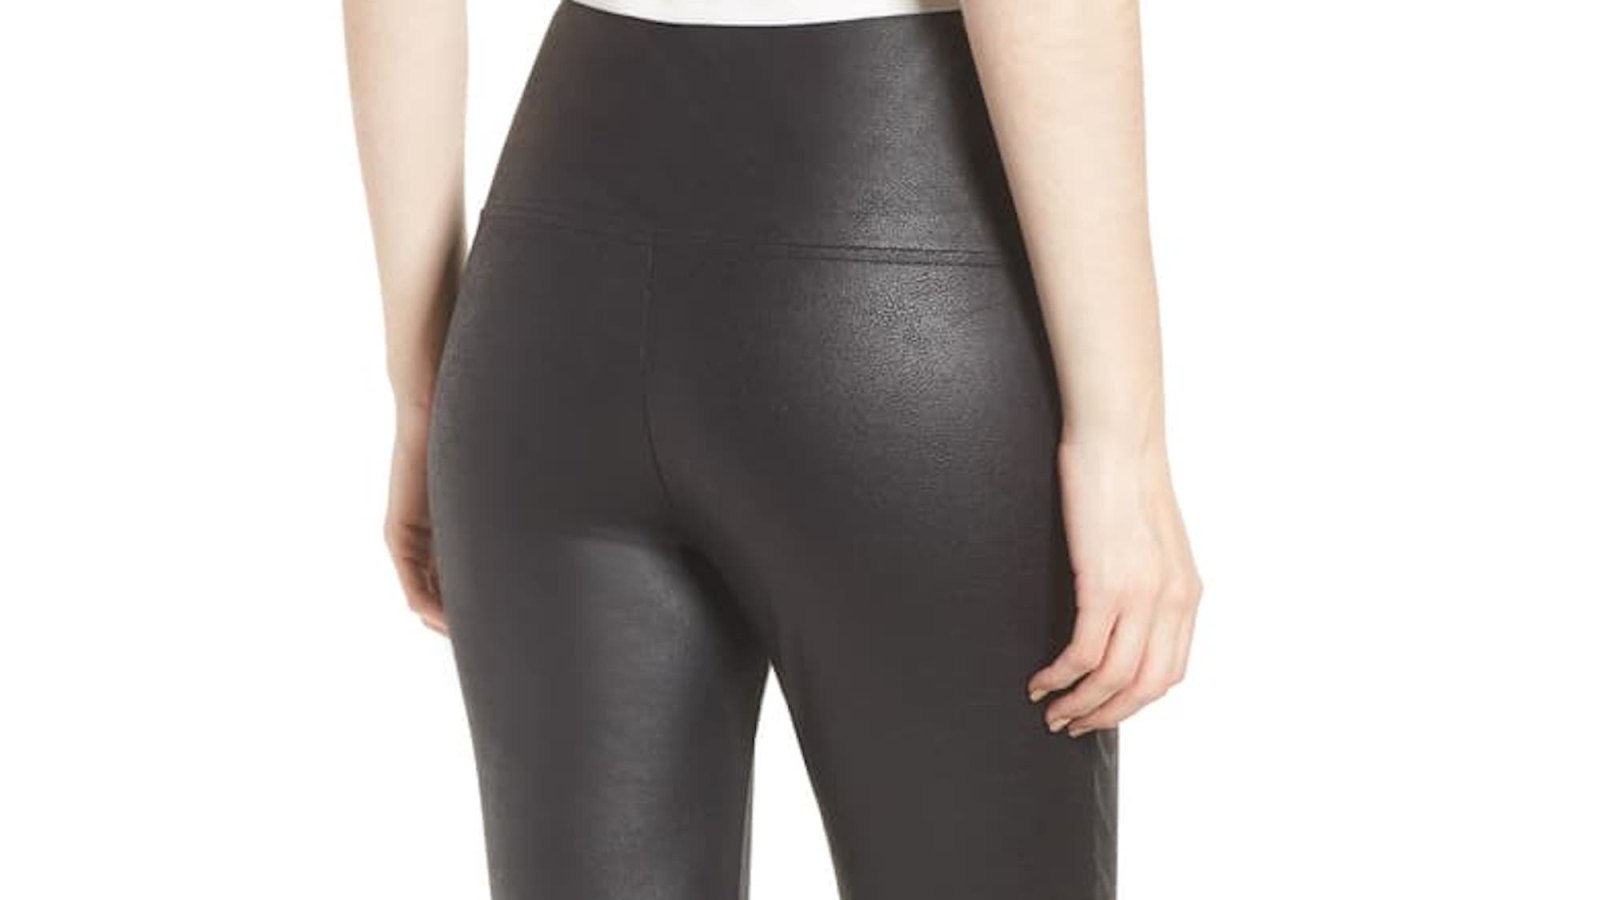 These Faux Leather Leggings Will Make People Think You're Wearing Pants